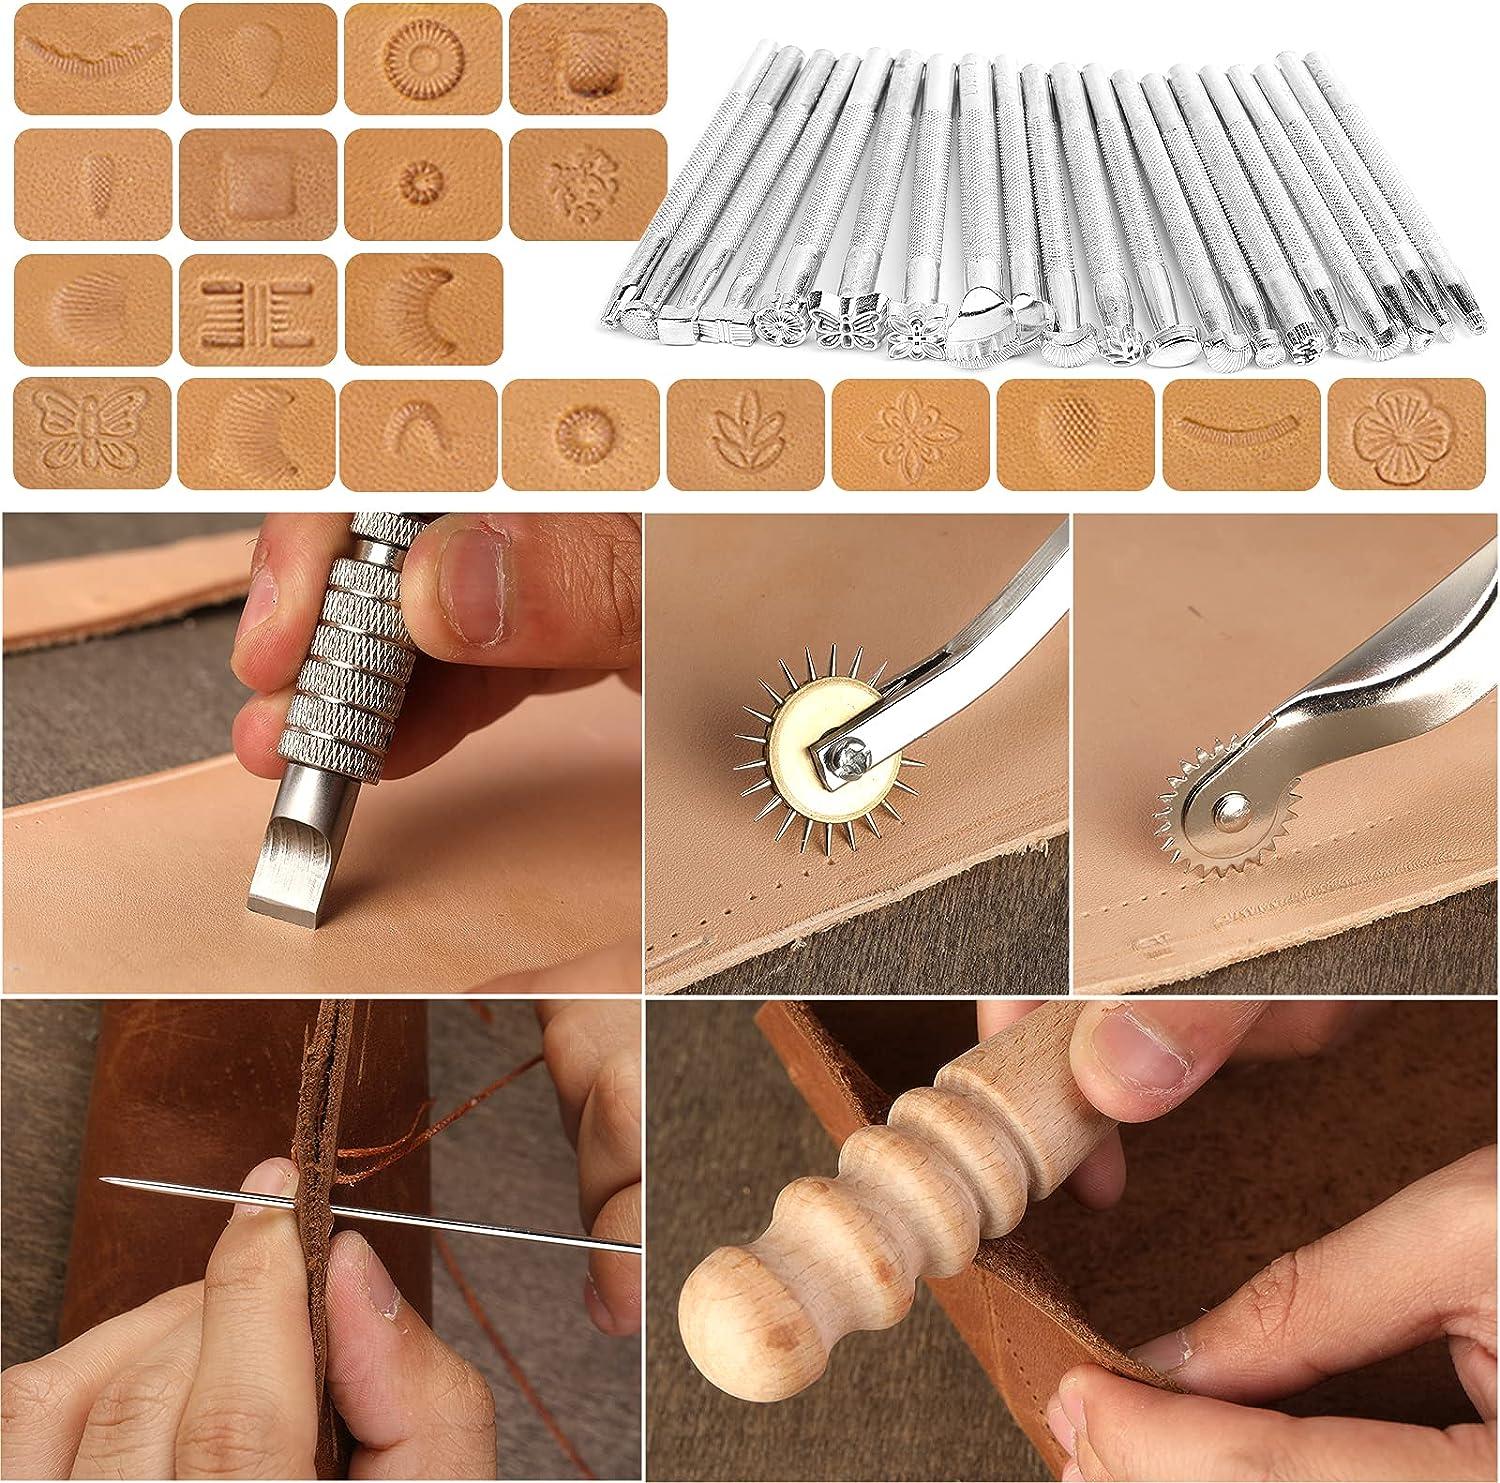 Electop Leather Working Tools Kit, Leather Crafting Tools and Supplies with  Leather Stamping Tool Prong Punch Edge Beveler Cutting Mat Awl Wax Ropes  Needles DIY Leather Making Stitching Sewing Kit